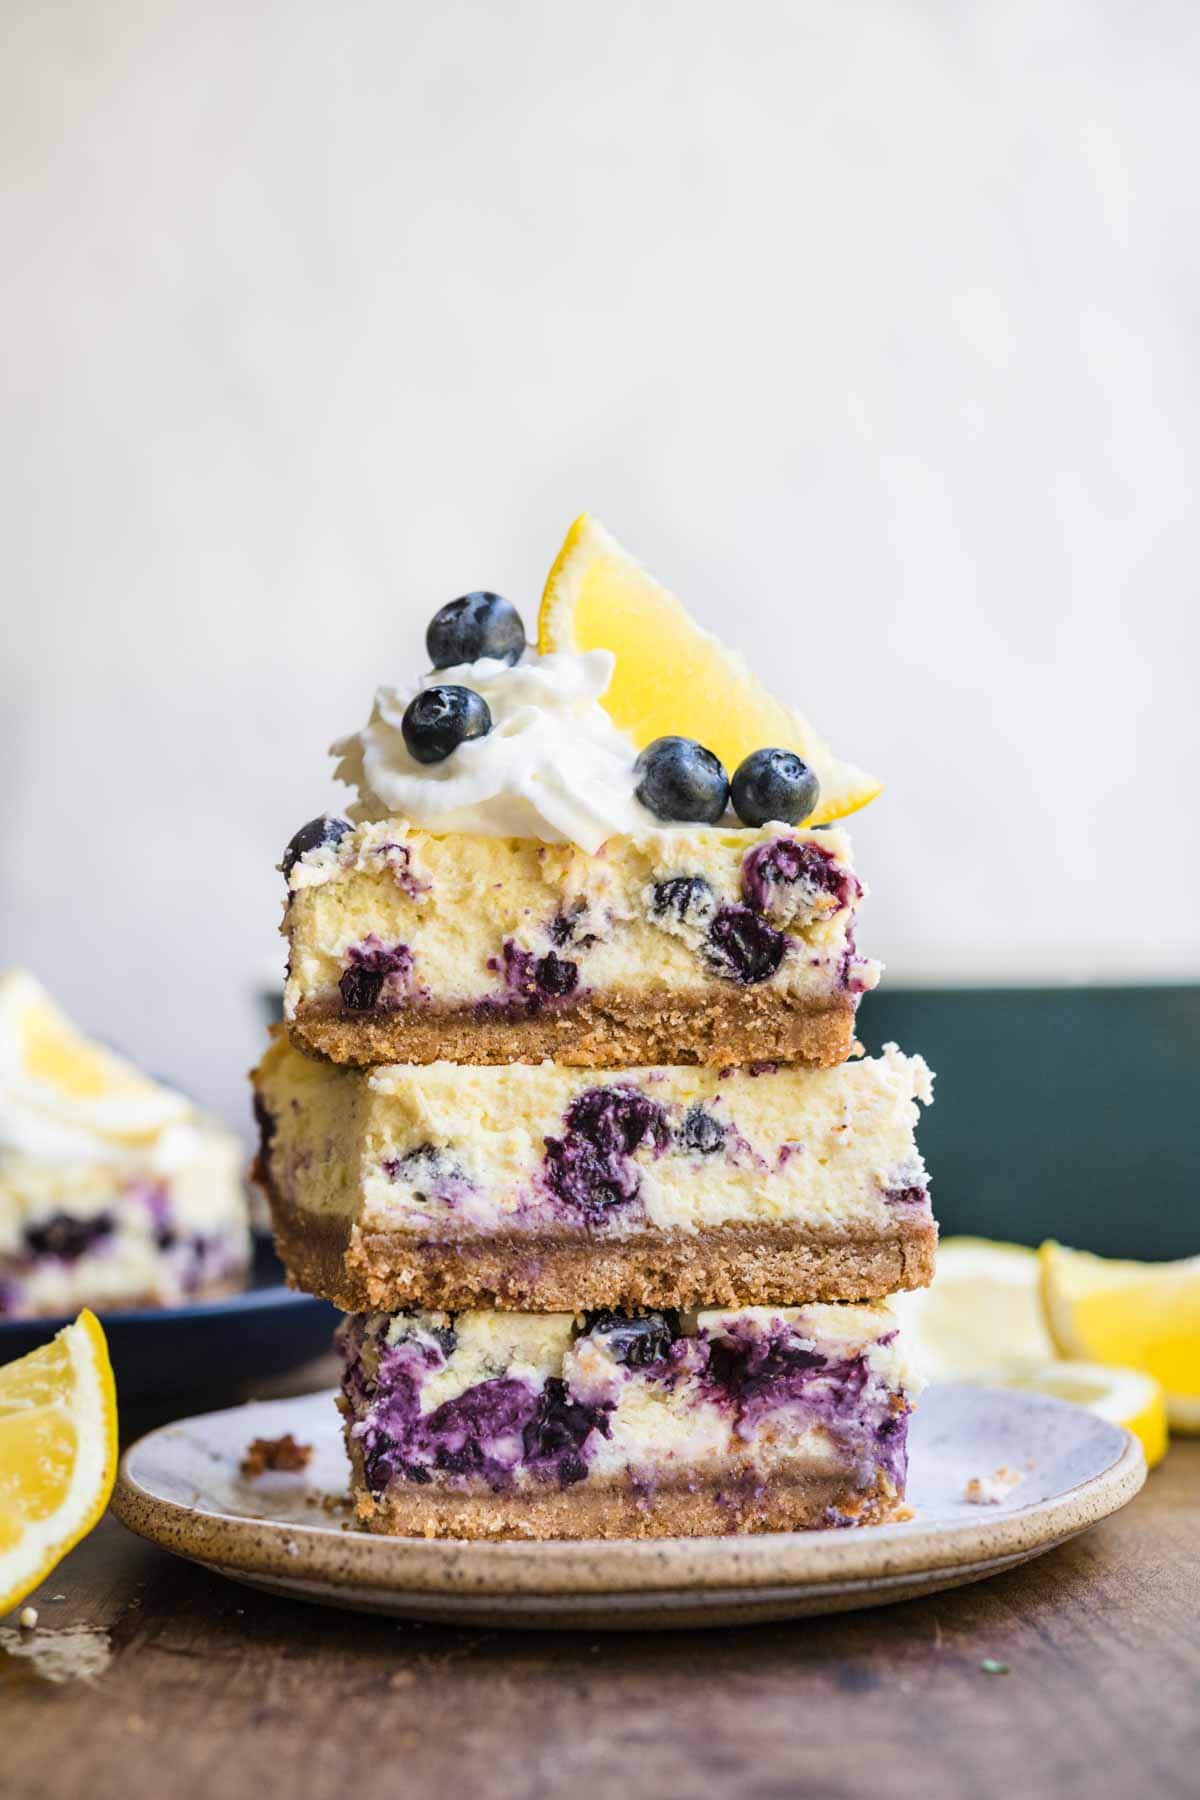 Blueberry Lemon Cheesecake Bars slices stacked on plate garnished with whipped cream, lemon wedge, and fresh blueberries